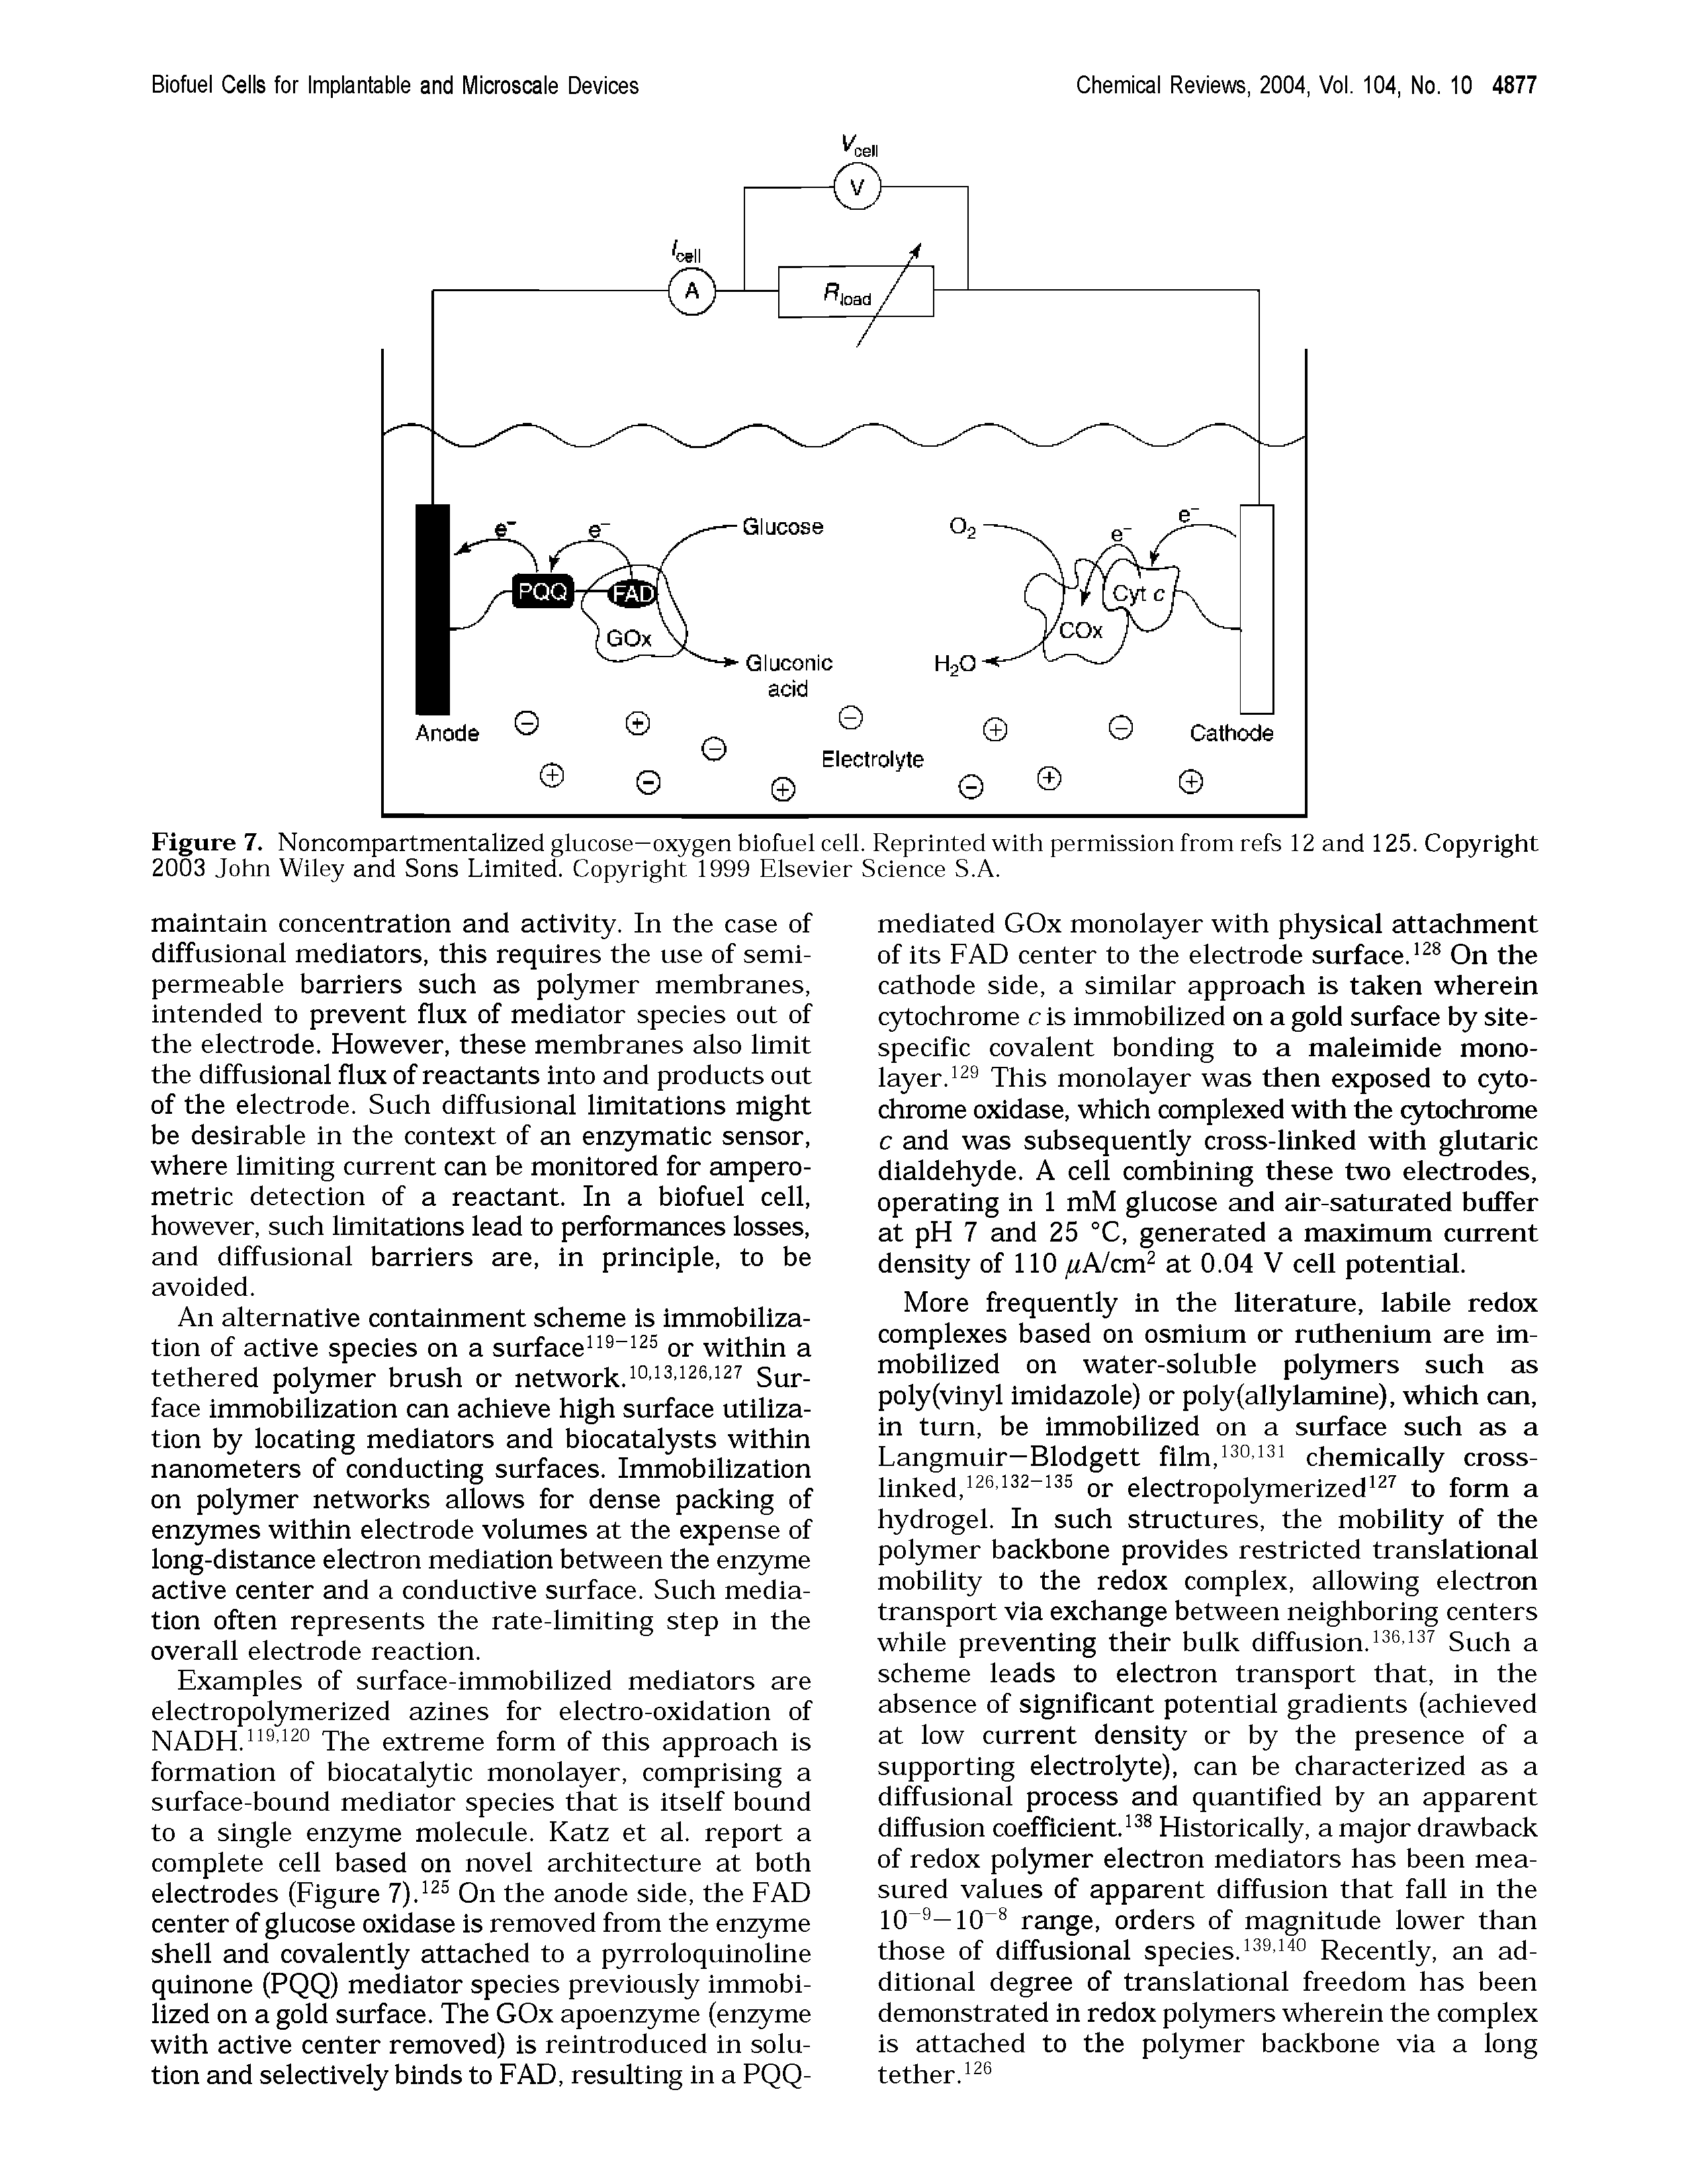 Figure 7. Noncompartmentalized glucose—oxygen biofuel cell. Reprinted with permission from refs 12 and 125. Copyright 2003 John Wiley and Sons Limited. Copyright 1999 Elsevier Science S.A.